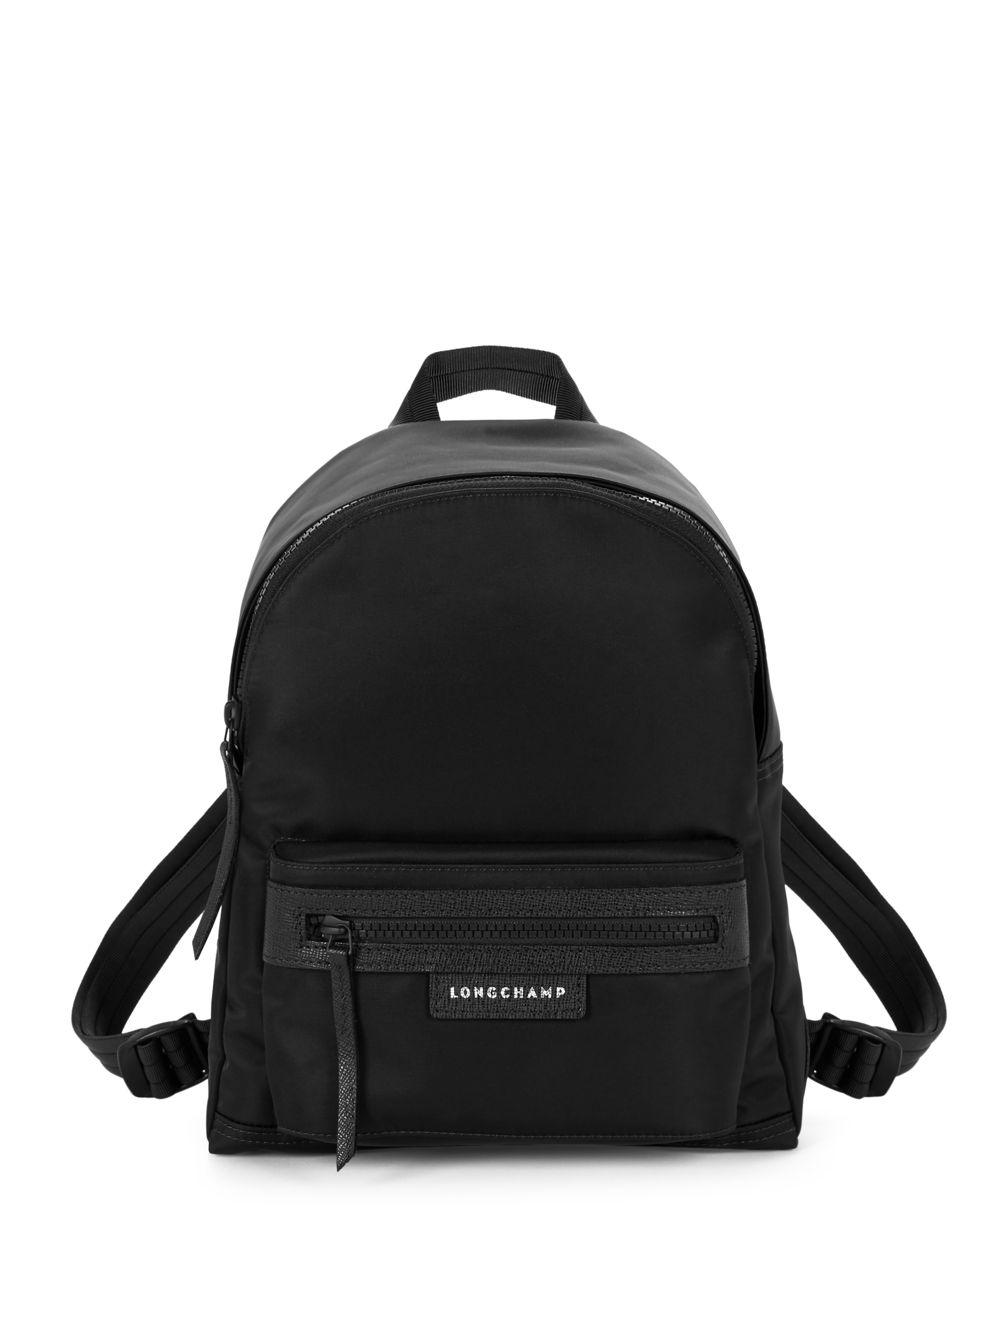 Longchamp Leather Small Le Pliage Neo Backpack in Black - Lyst